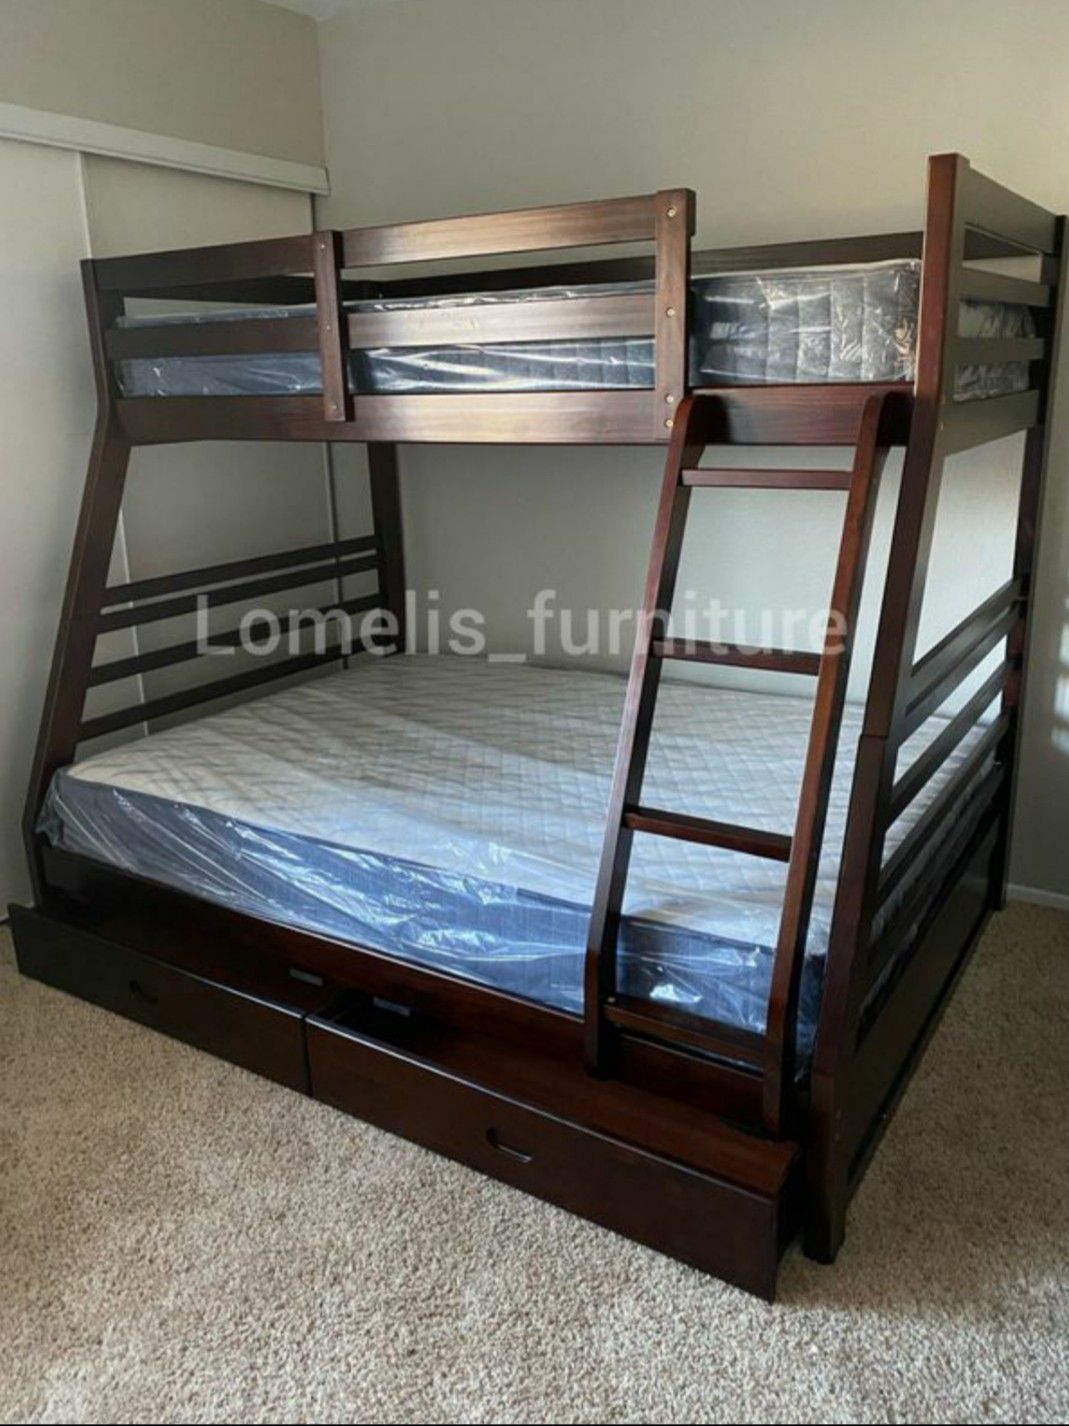 TWIN/FULL BUNK BEDS W MATTRESSES INCLUDED.